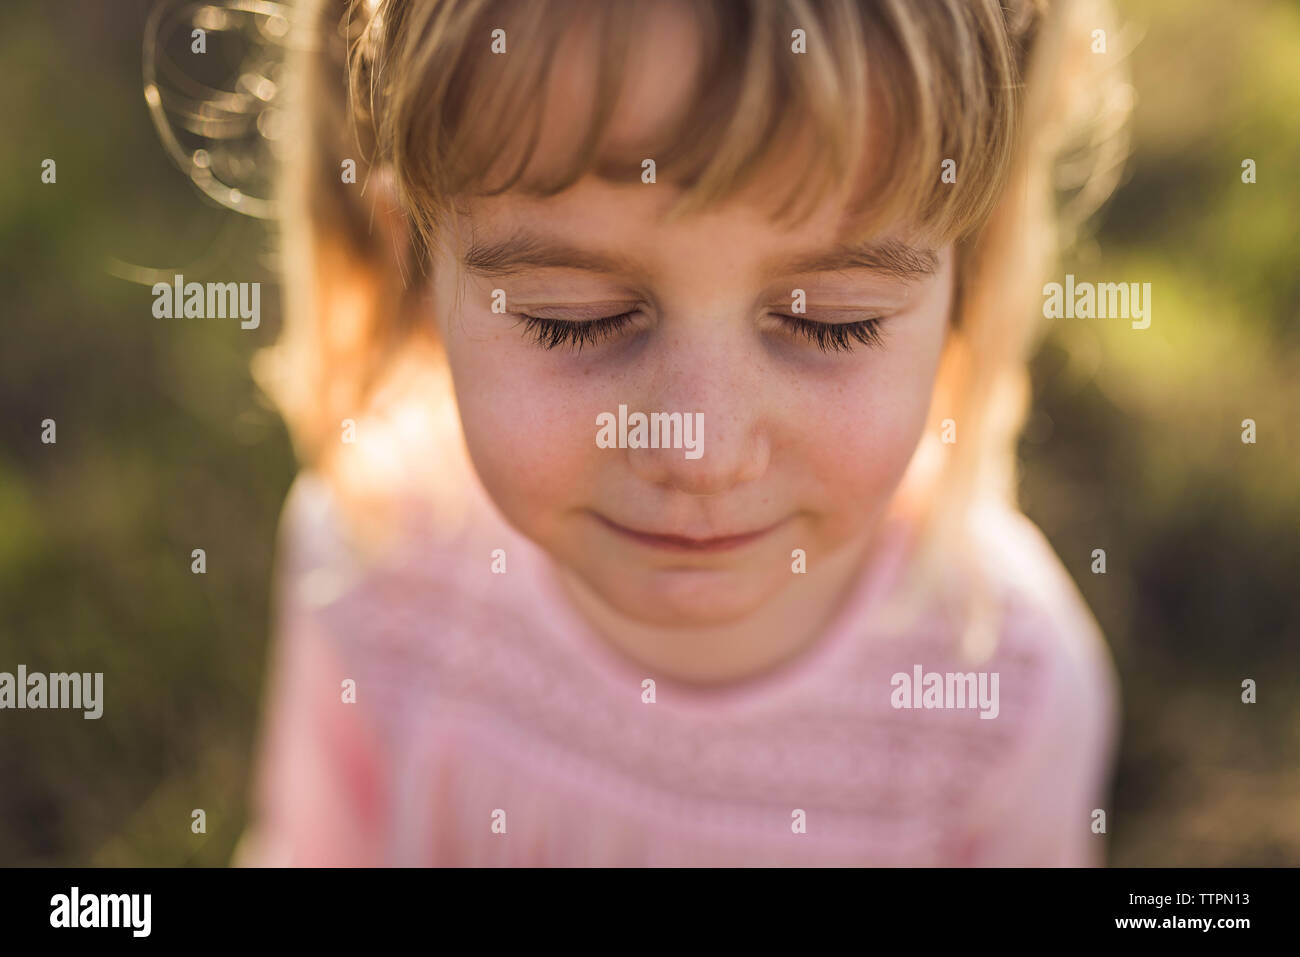 Close up portrait of young girl with eyes closed Stock Photo